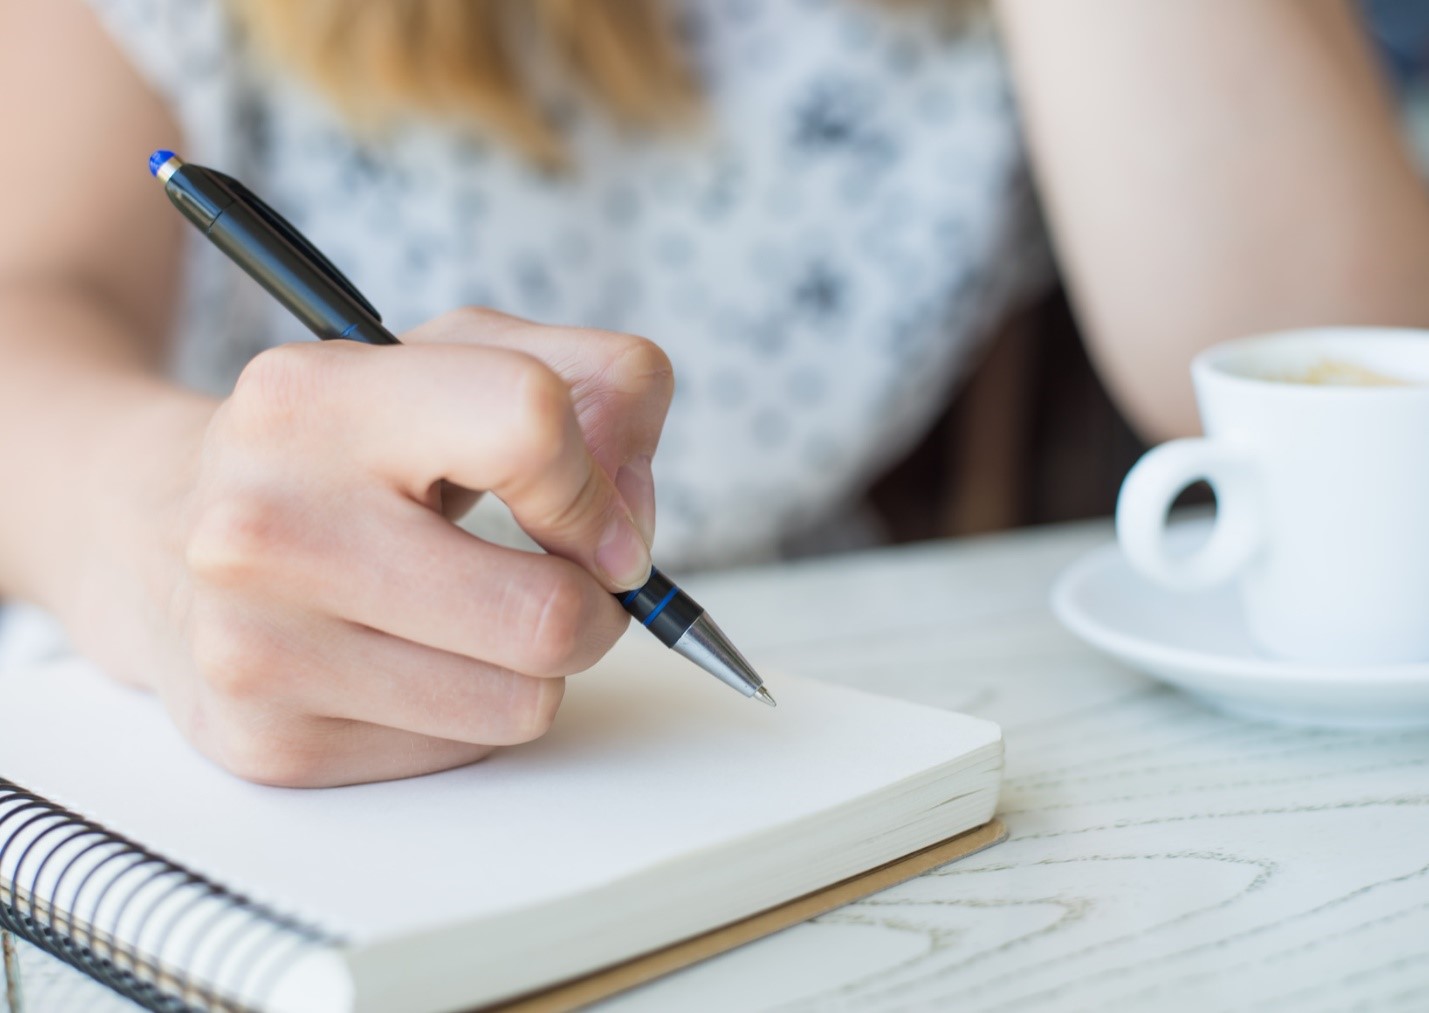 5 Reasons Why Good Writing Skills Are Vital For Students